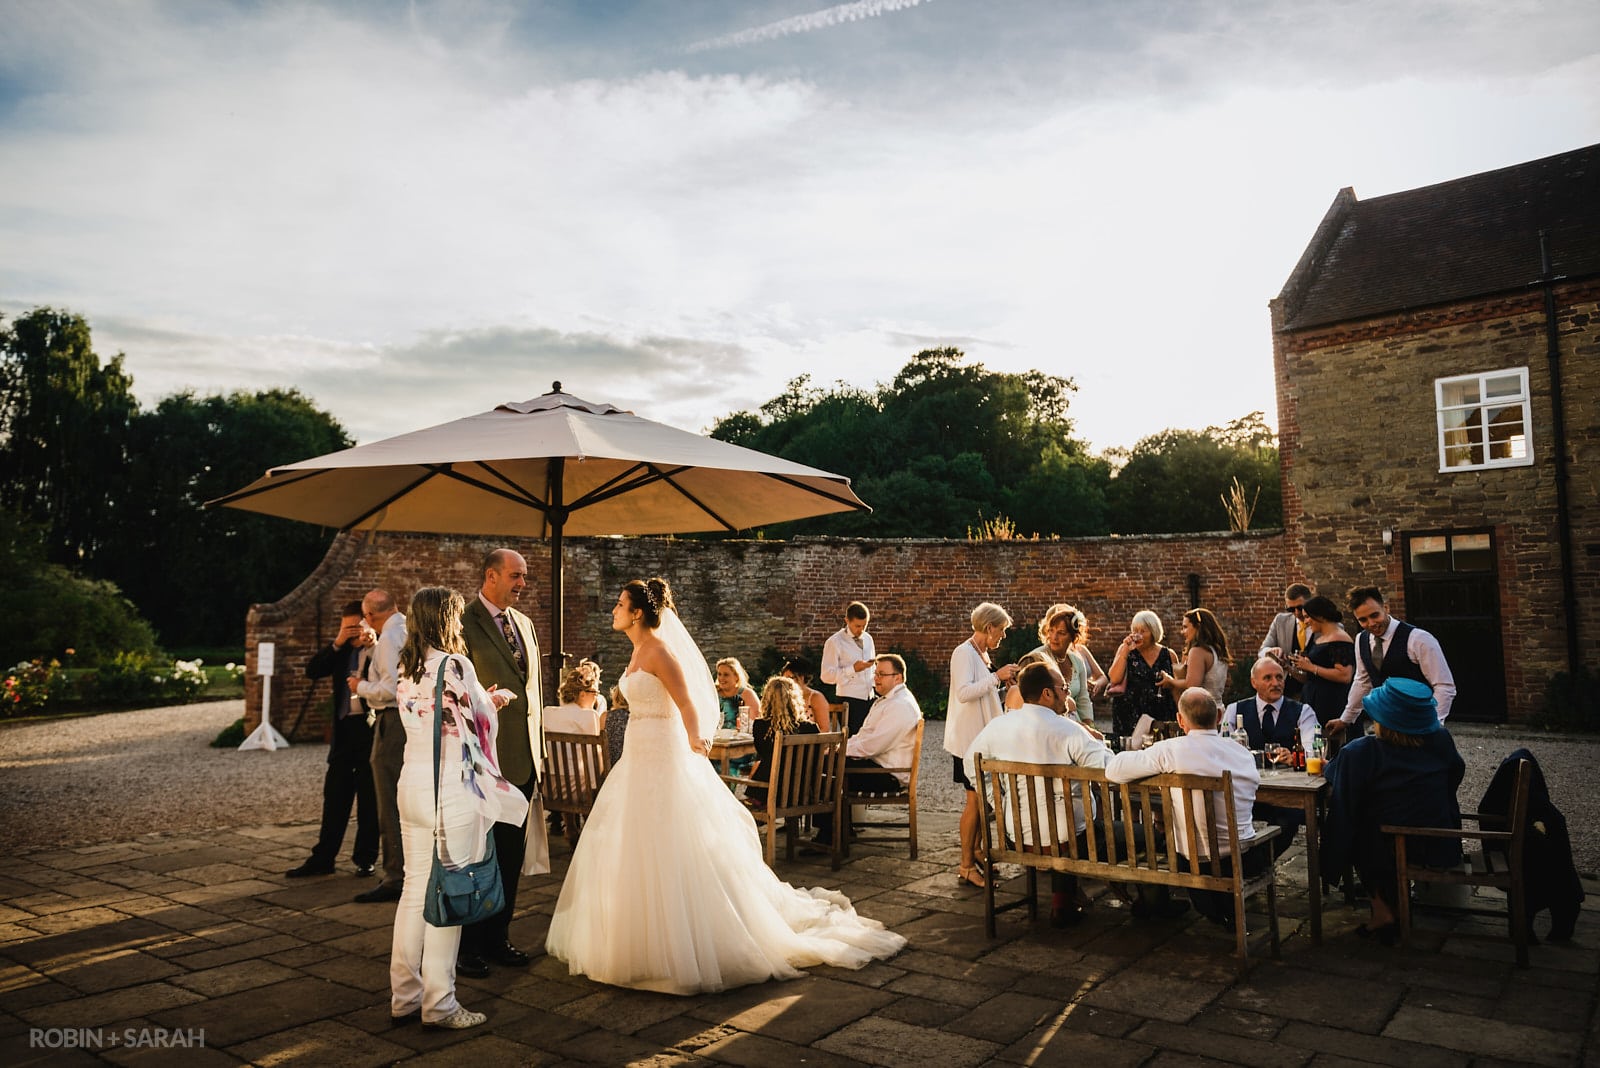 Wedding guests relaxing in the evening sunlight in courtyard at Delbury Hall